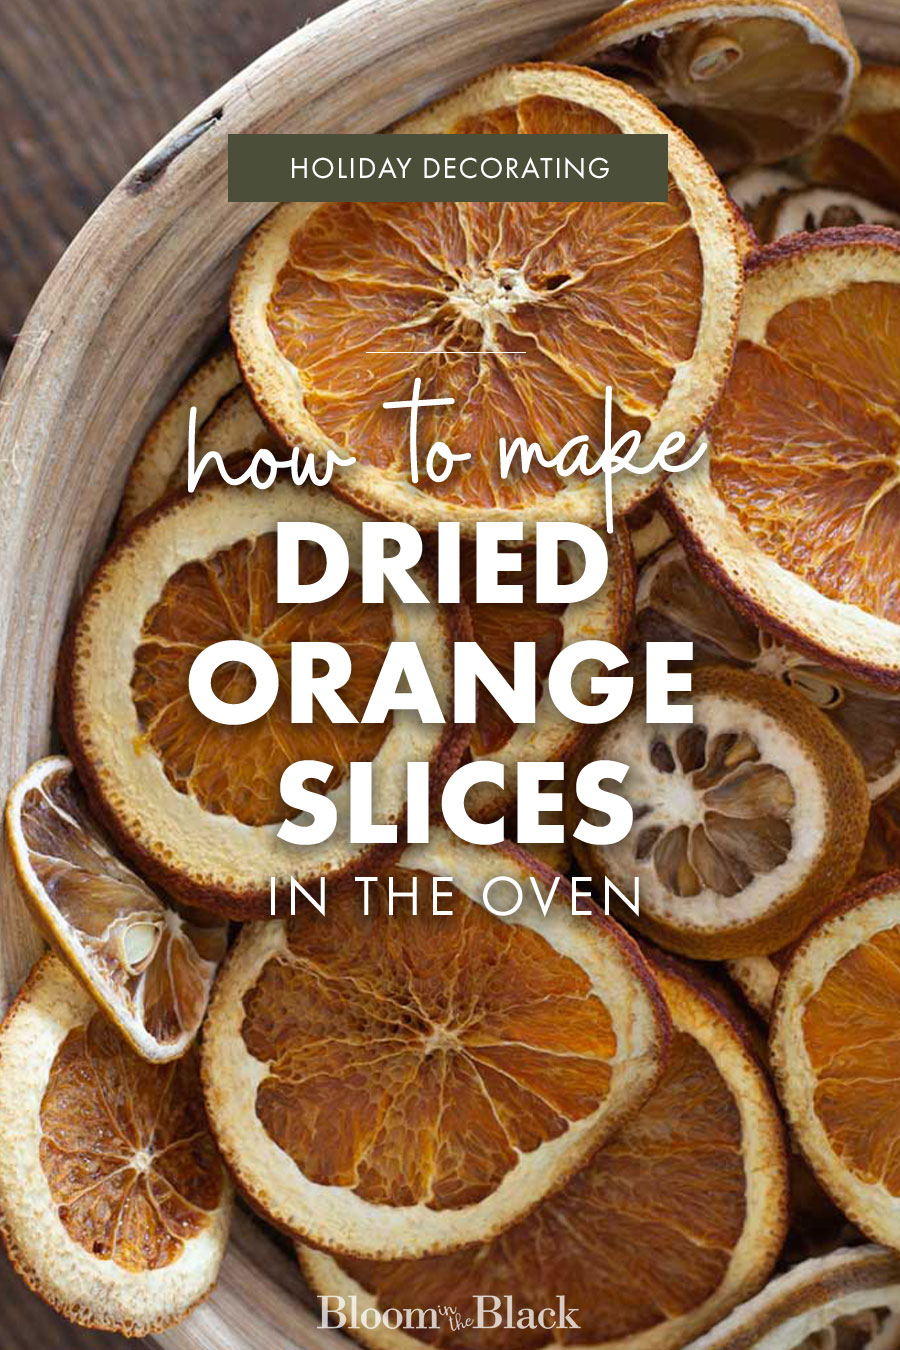 Learn how to make a big batch of dried orange slices to use for your seasonal decor. Dehydrated citrus slices can be used to decorate for fall, Thanksgiving, Christmas, and winter. Plus? It's super cheap and will make your home smell amazing. Follow this simple tutorials to make your own dried orange decor.